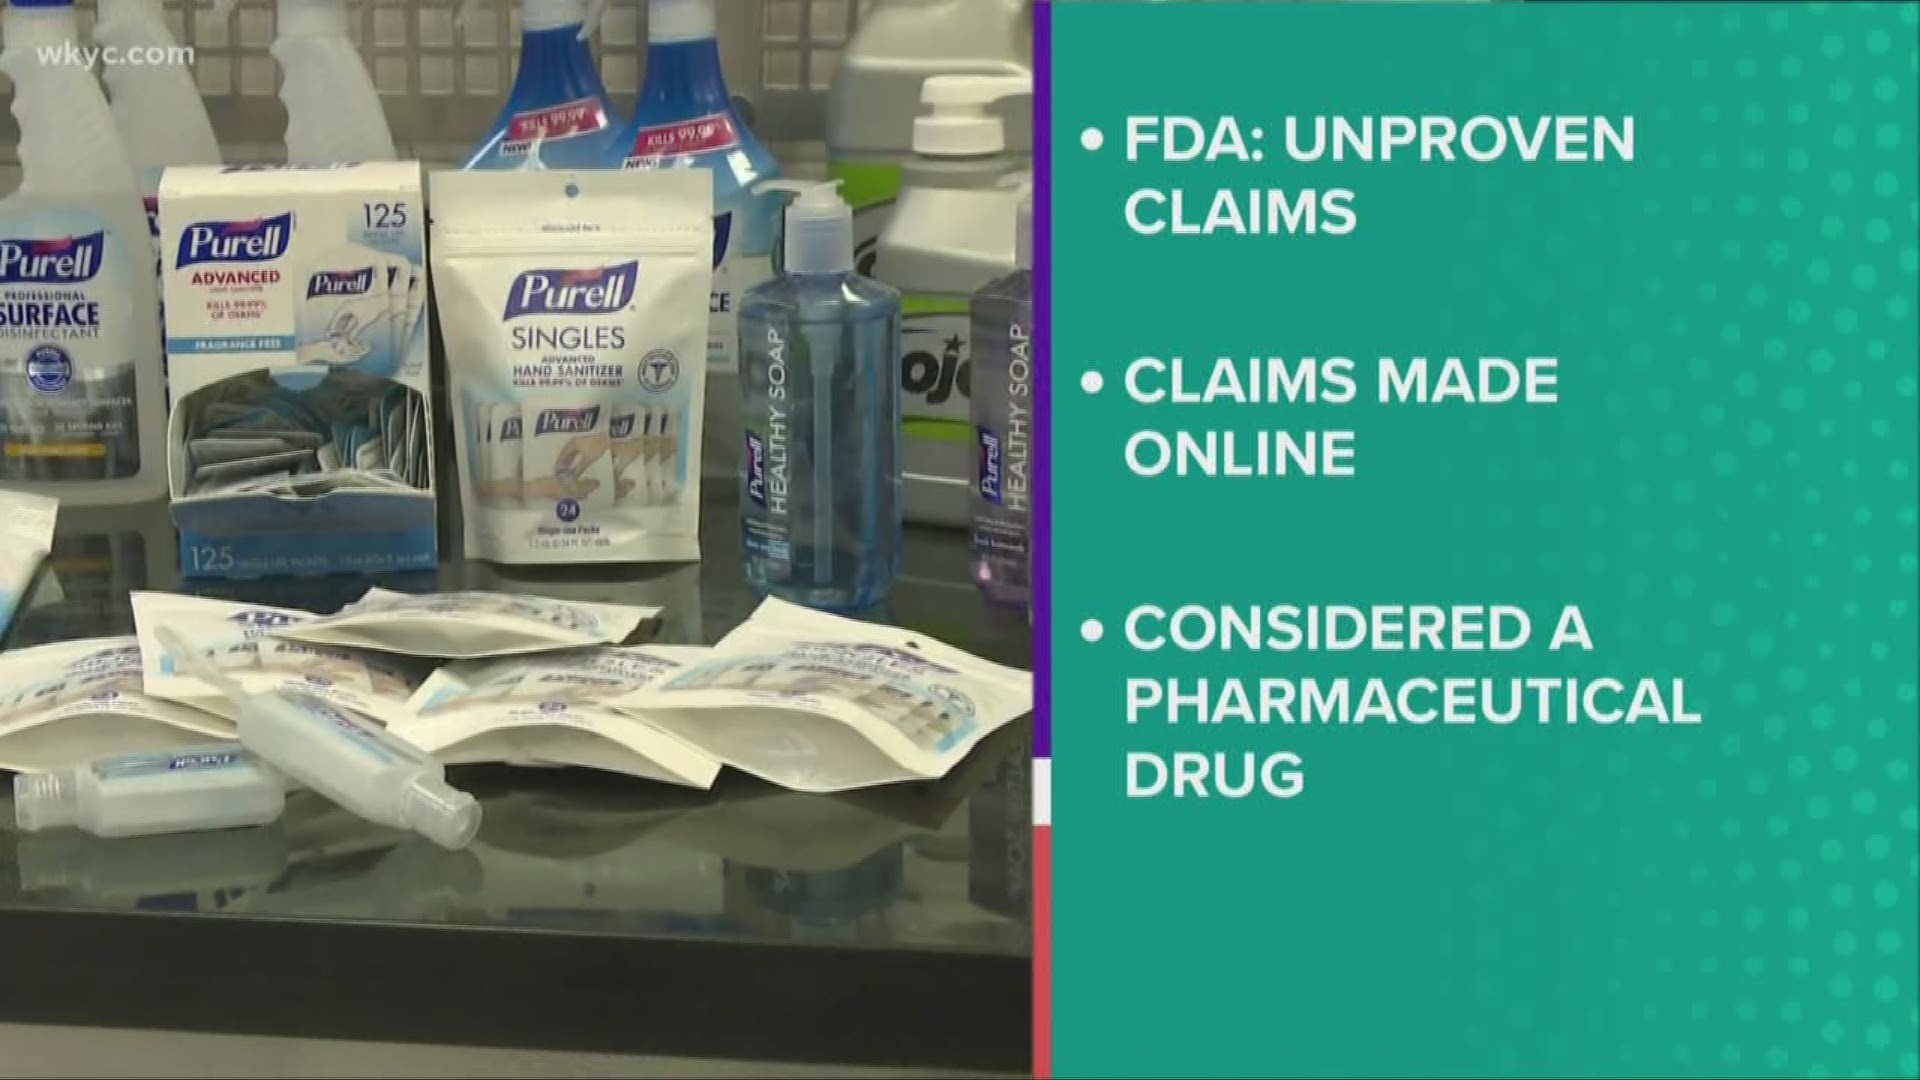 The FDA says such claims are unproven. Jay and Betsy discuss.